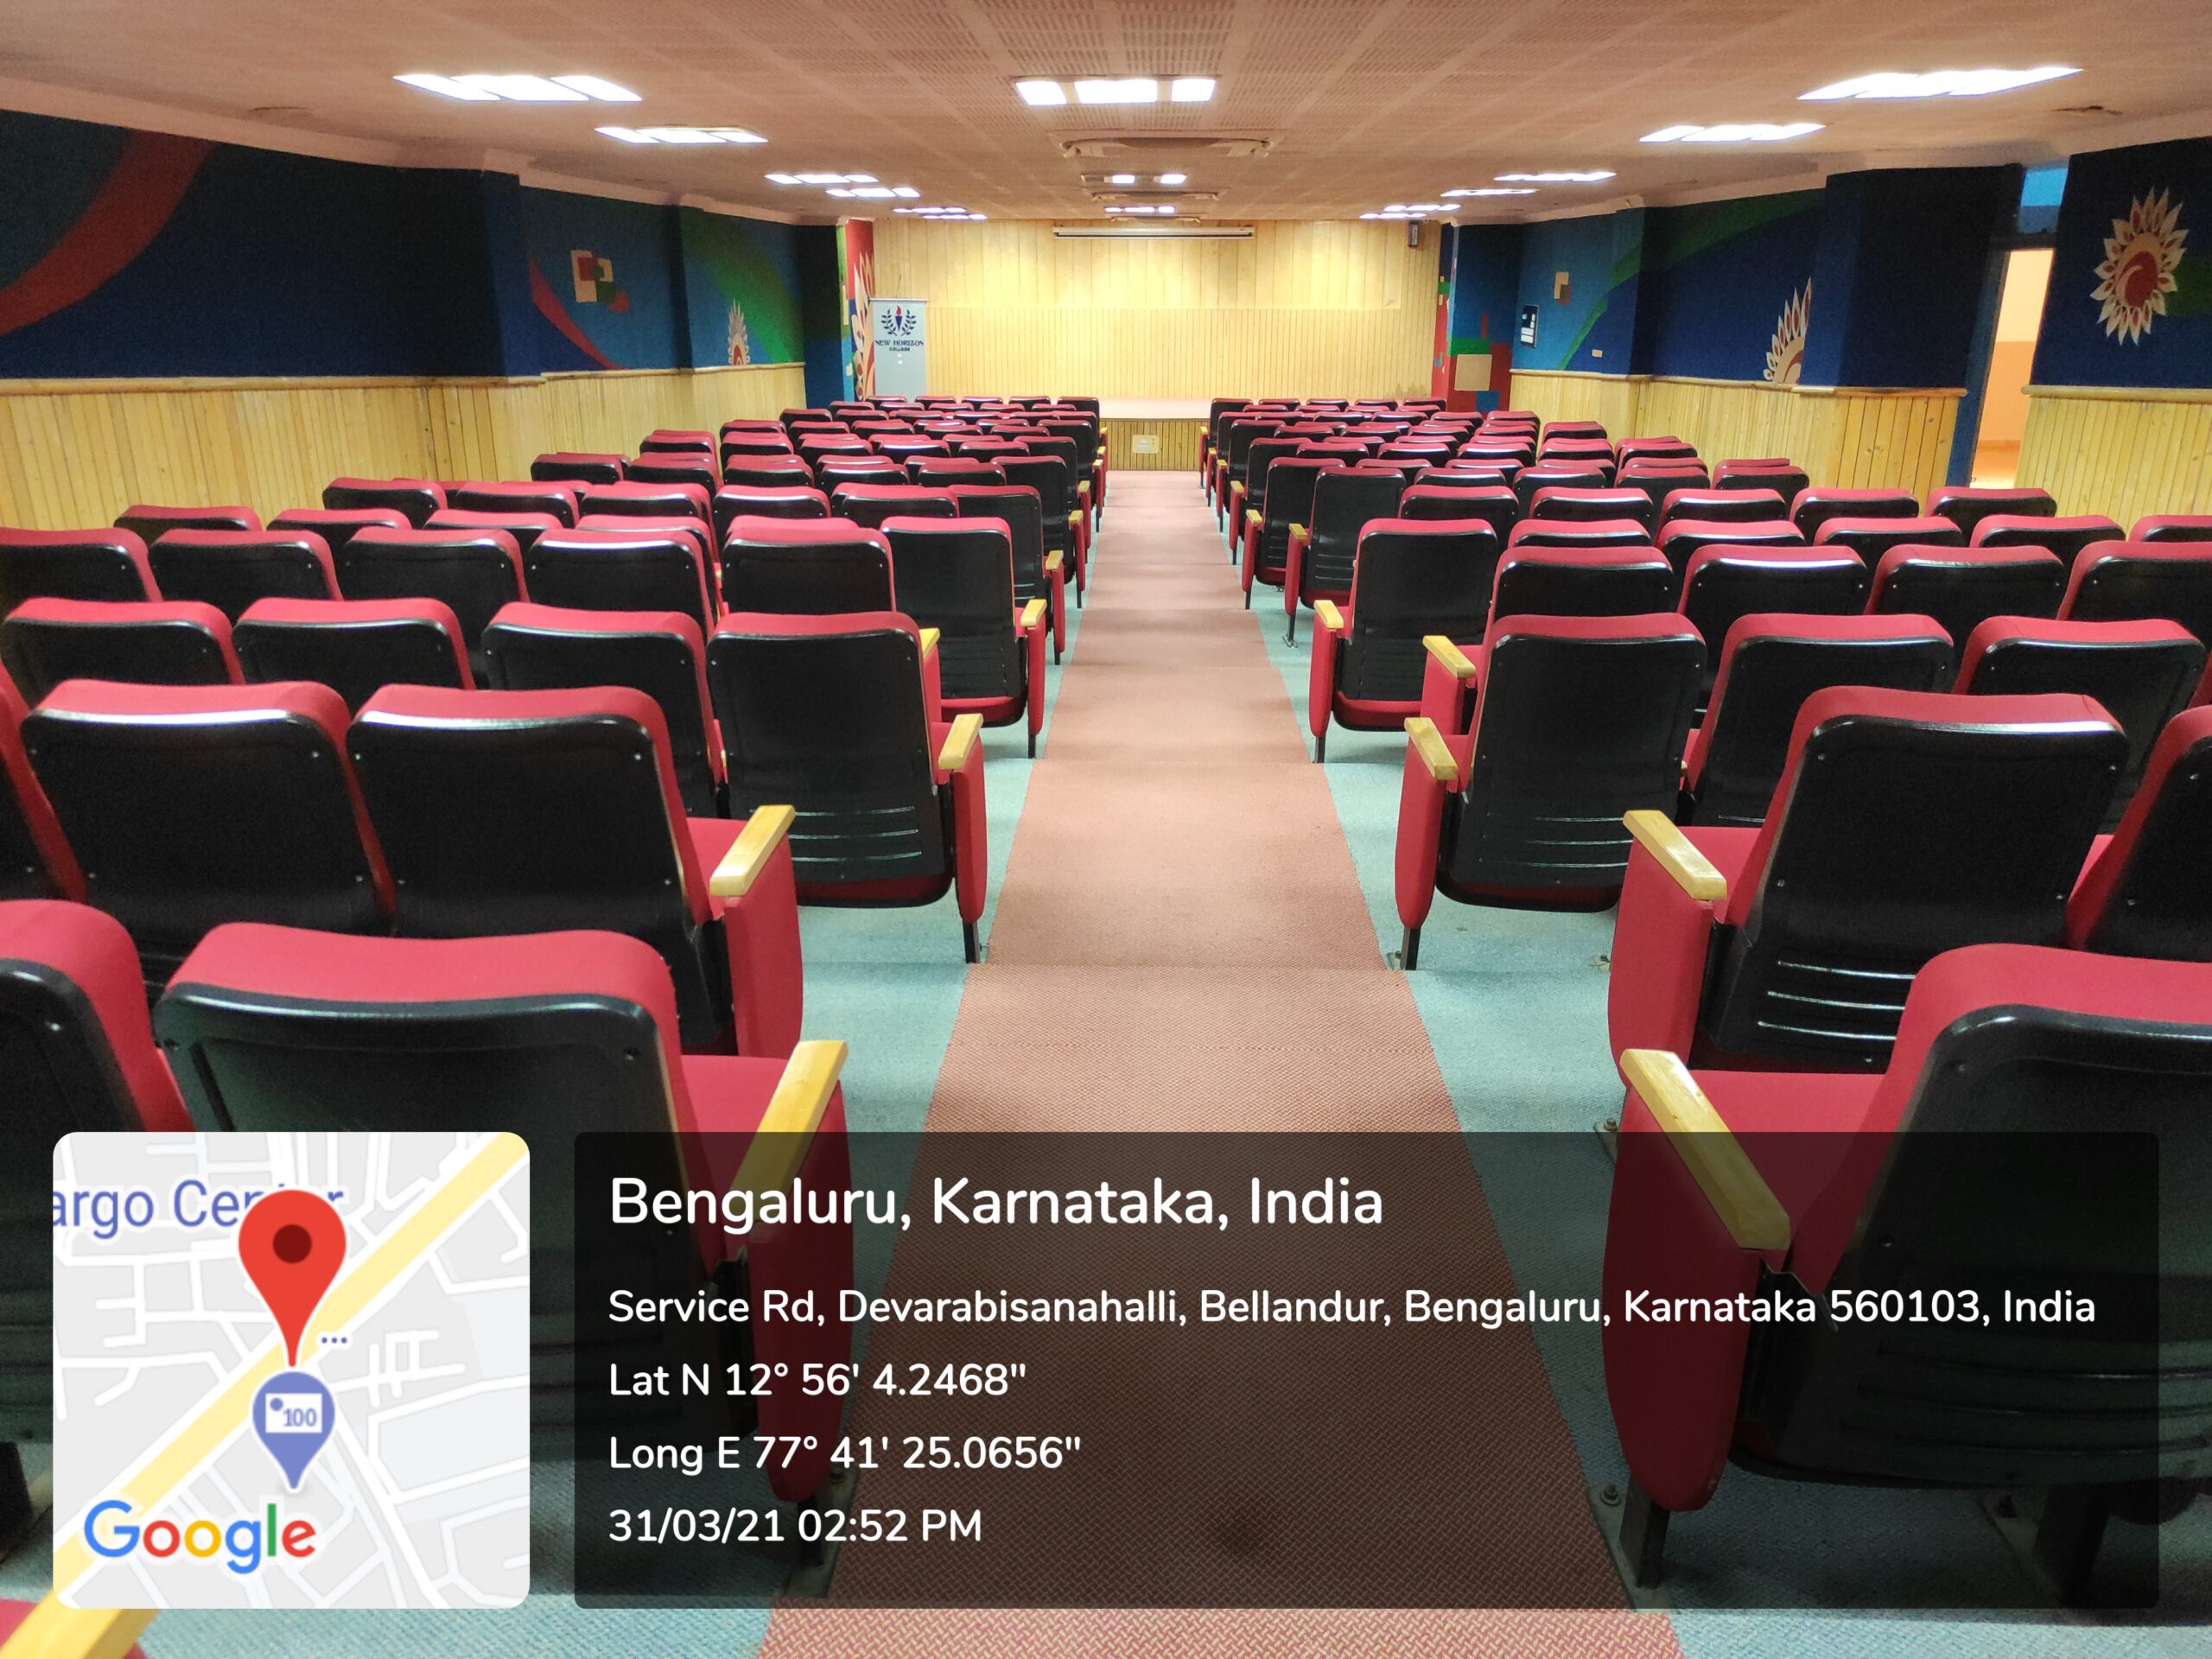 Seminar Hall- Infrastructure- Top 10 Engineering Colleges in India